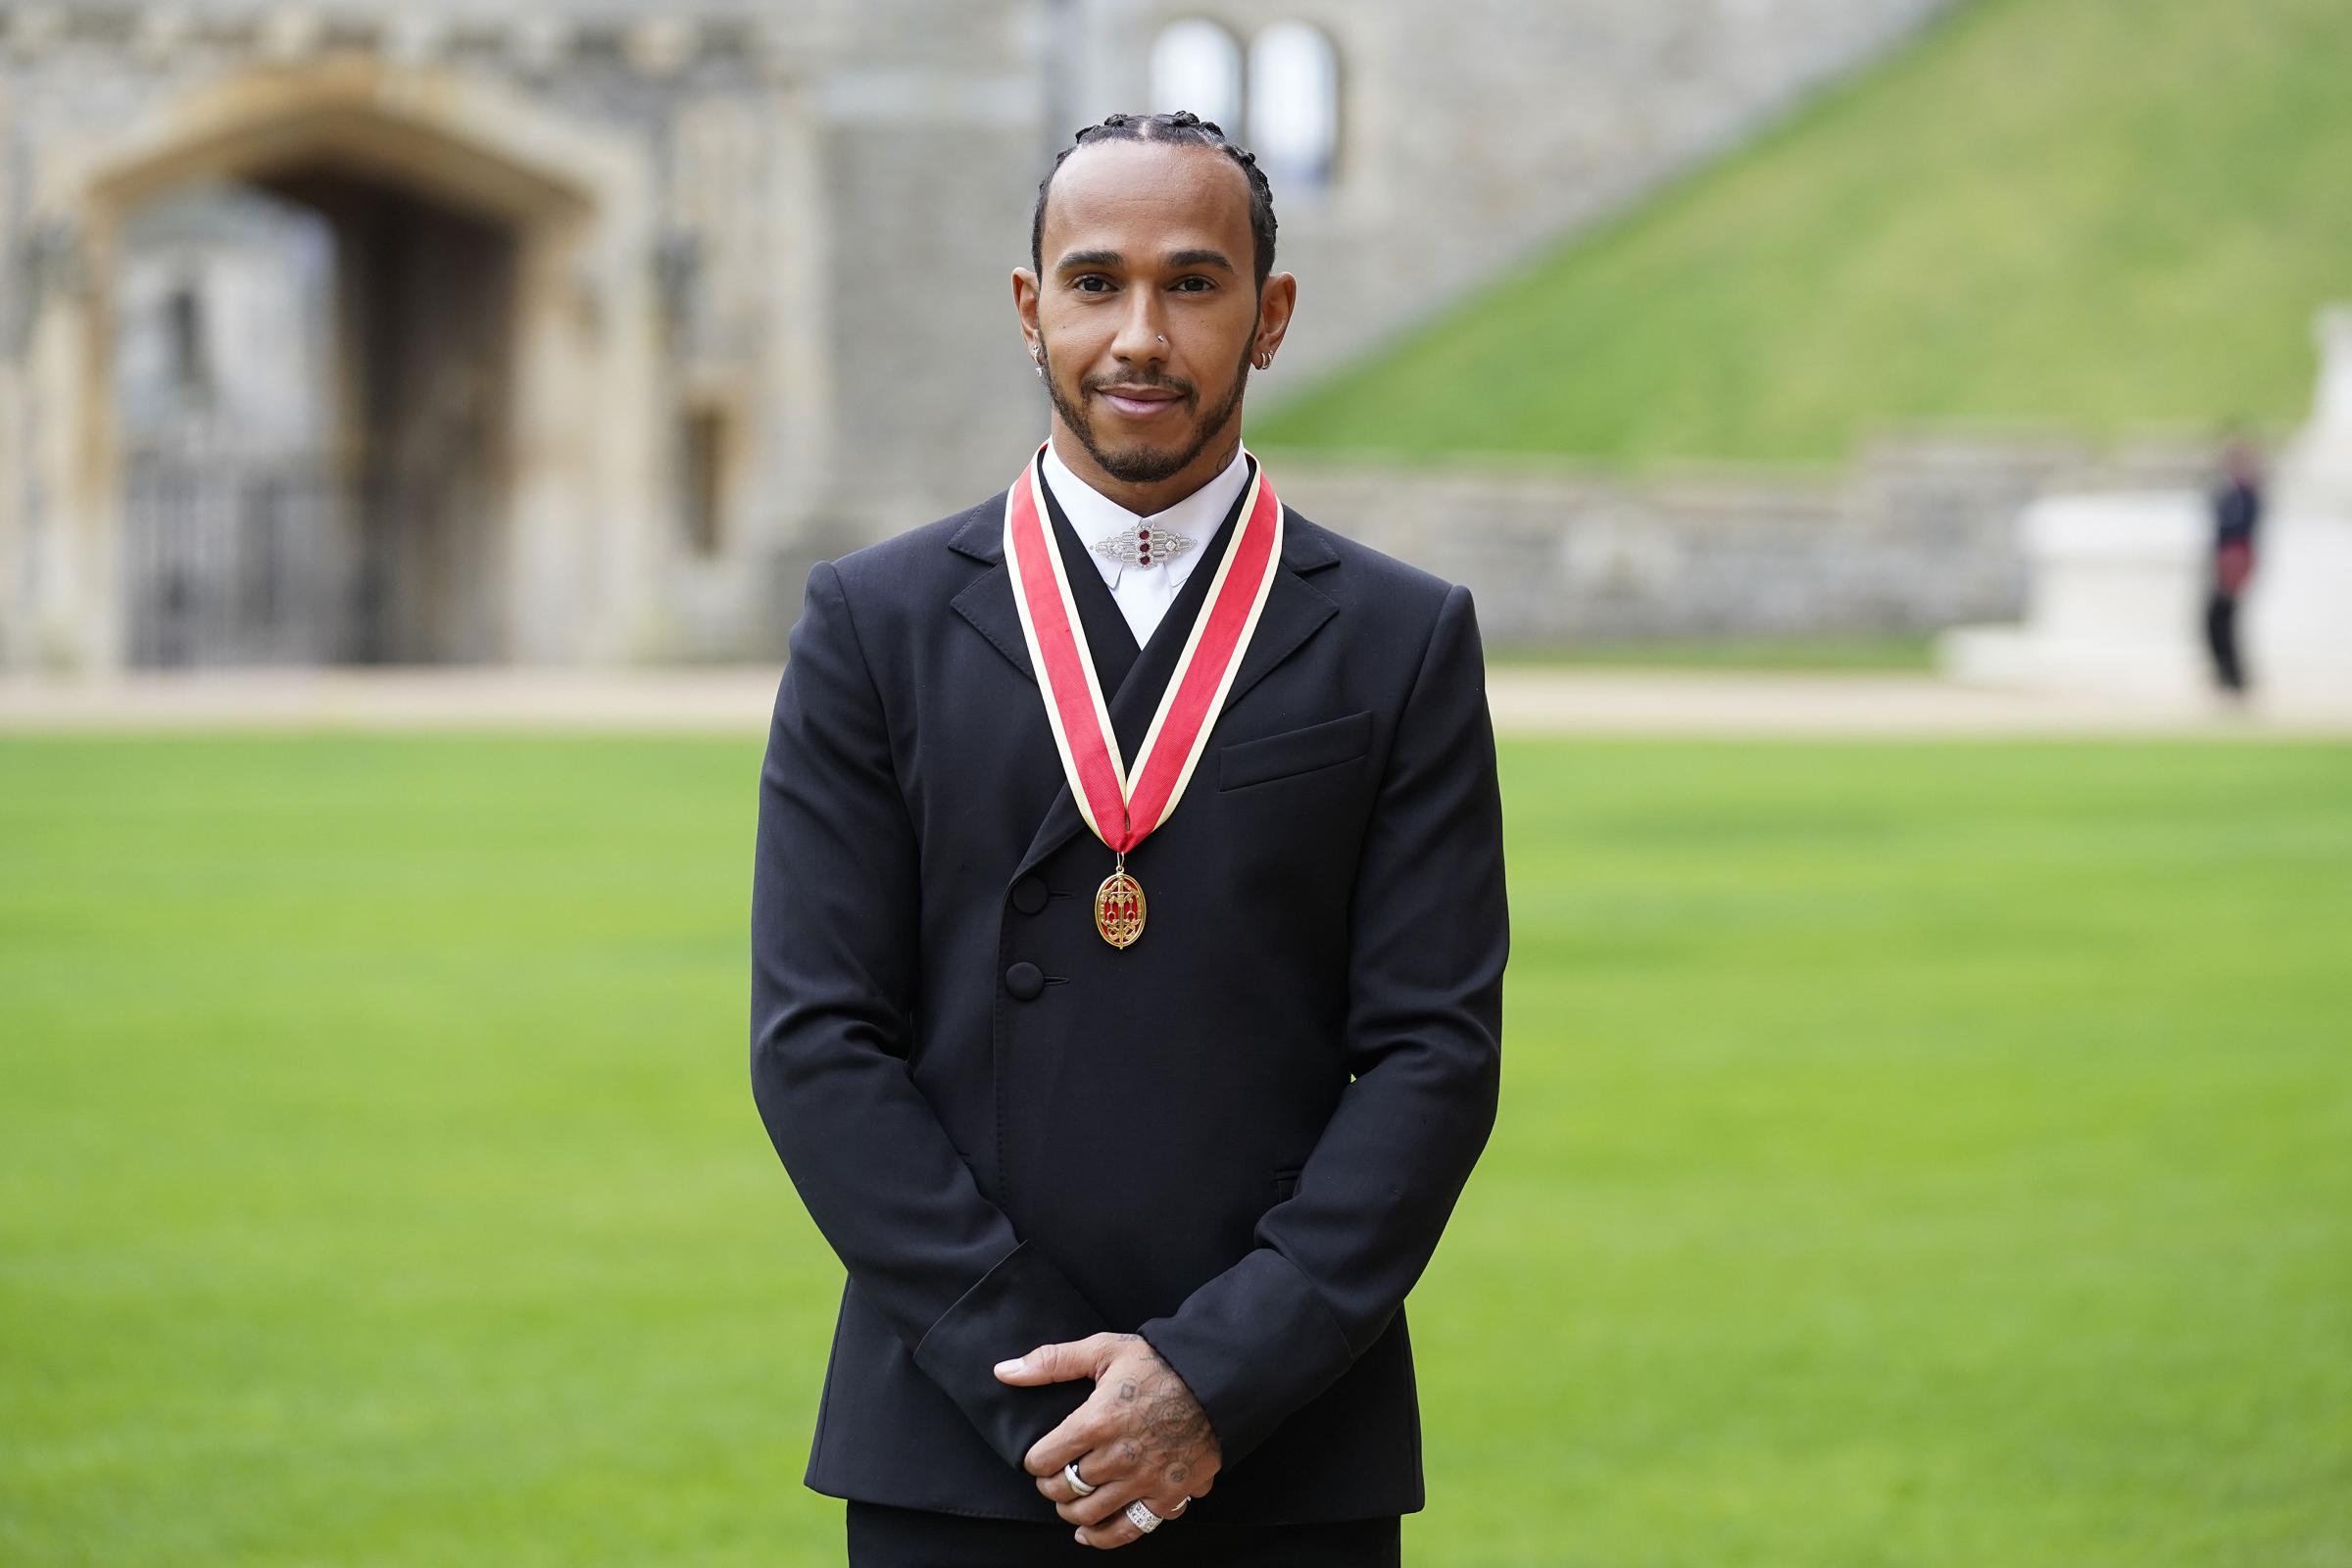 Sir Lewis Hamilton knighted days after title heartache